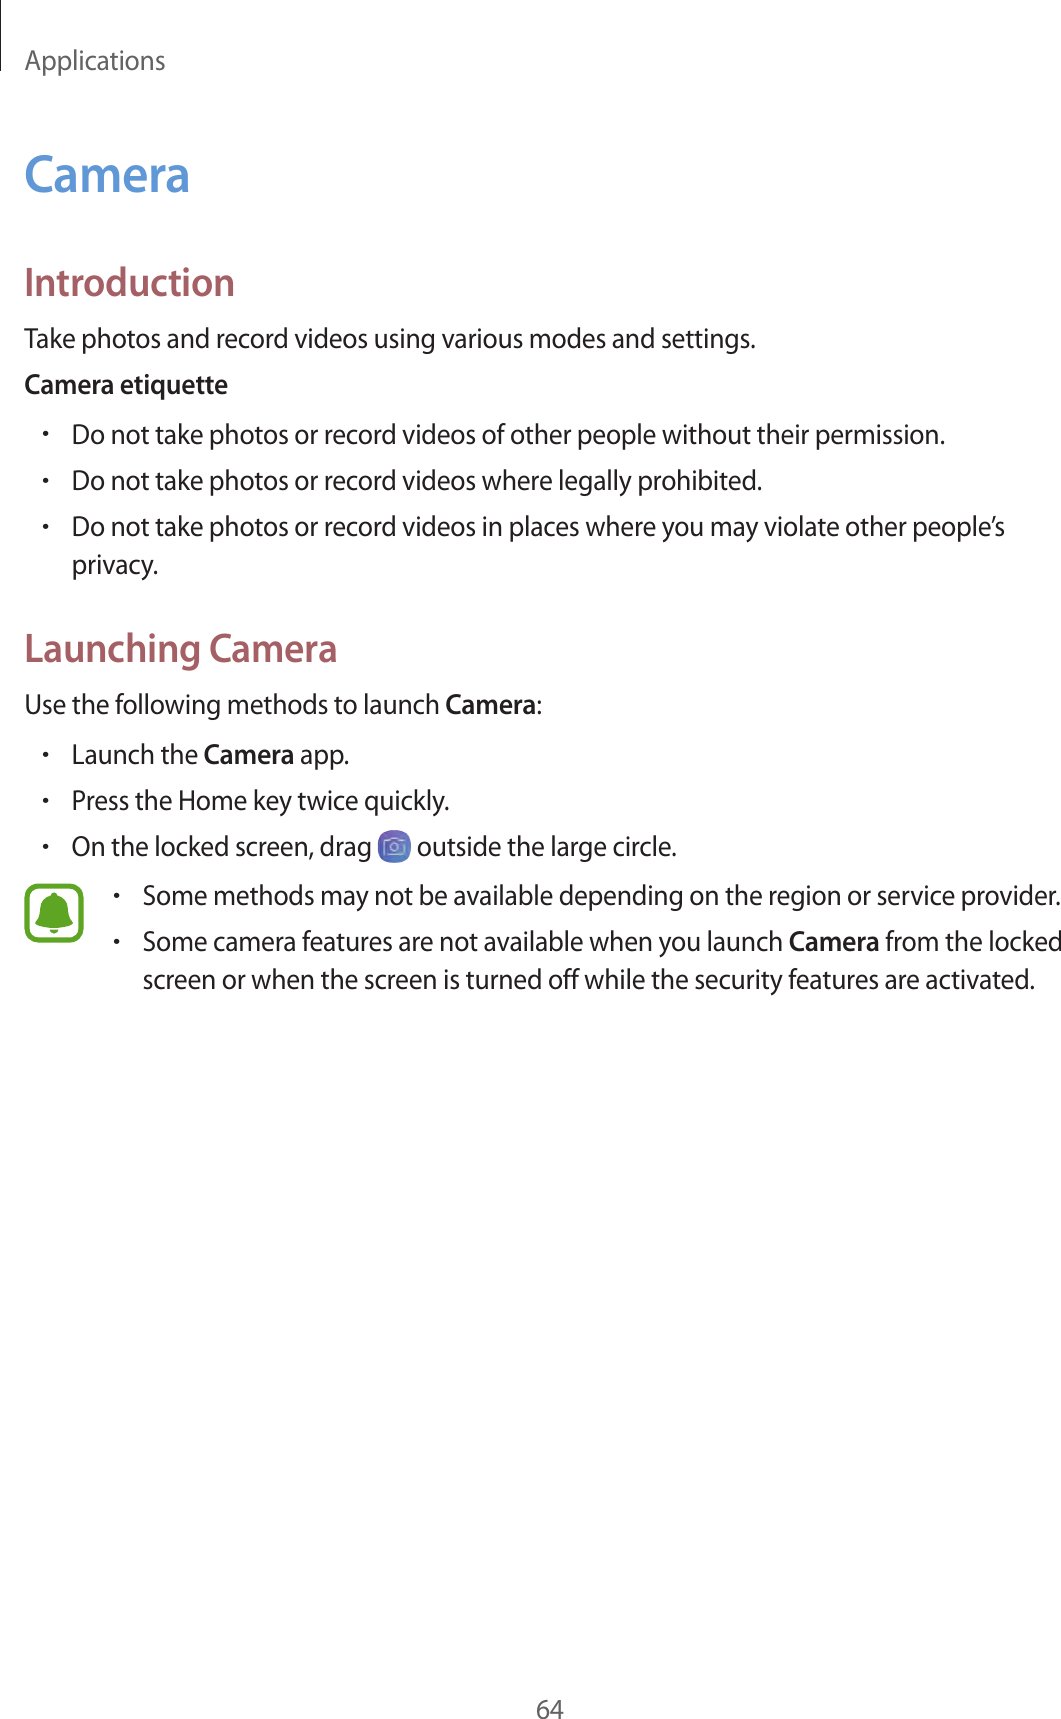 Applications64CameraIntroductionTake photos and record videos using various modes and settings.Camera etiquette•Do not take photos or record videos of other people without their permission.•Do not take photos or record videos where legally prohibited.•Do not take photos or record videos in places where you may violate other people’s privacy.Launching CameraUse the following methods to launch Camera:•Launch the Camera app.•Press the Home key twice quickly.•On the locked screen, drag   outside the large circle.•Some methods may not be available depending on the region or service provider.•Some camera features are not available when you launch Camera from the locked screen or when the screen is turned off while the security features are activated.